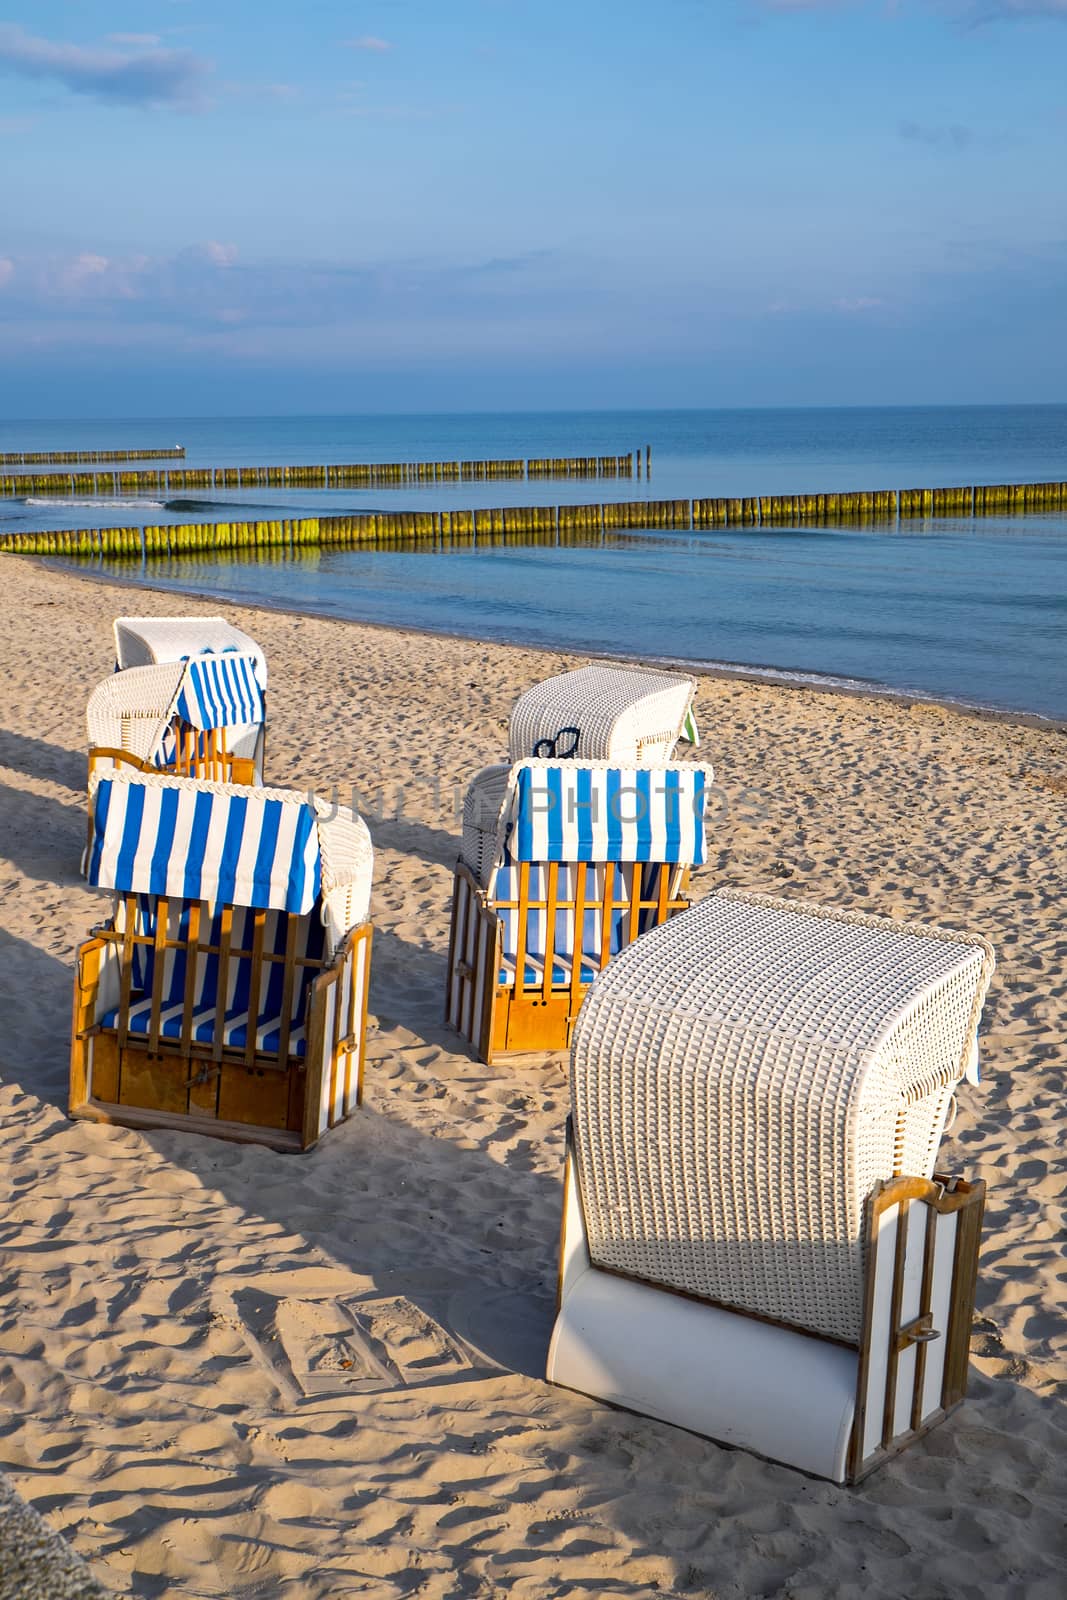 Beach chairs seen at the Baltic Sea in Germany